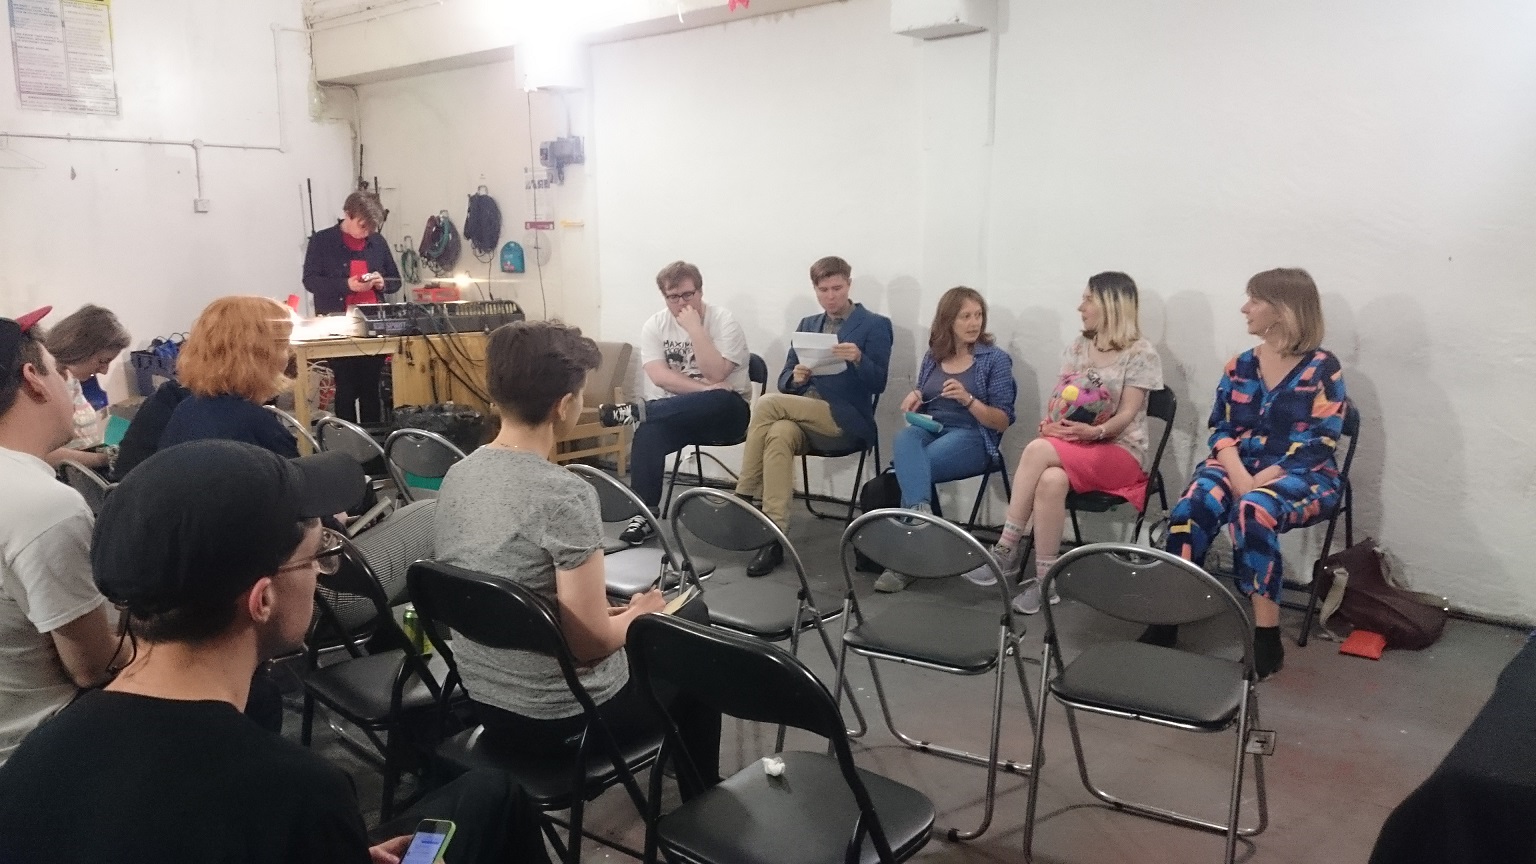 I took part in a panel discussion at DIY Space’s Radio Festival today. Hosted by Matt Cheeseman, we discussed providing a platform for under-represented voices. I spoke about my Resonance FM show ‘Out in South London’. This was taken just before we started, when nobody had yet dared to sit on the front row.